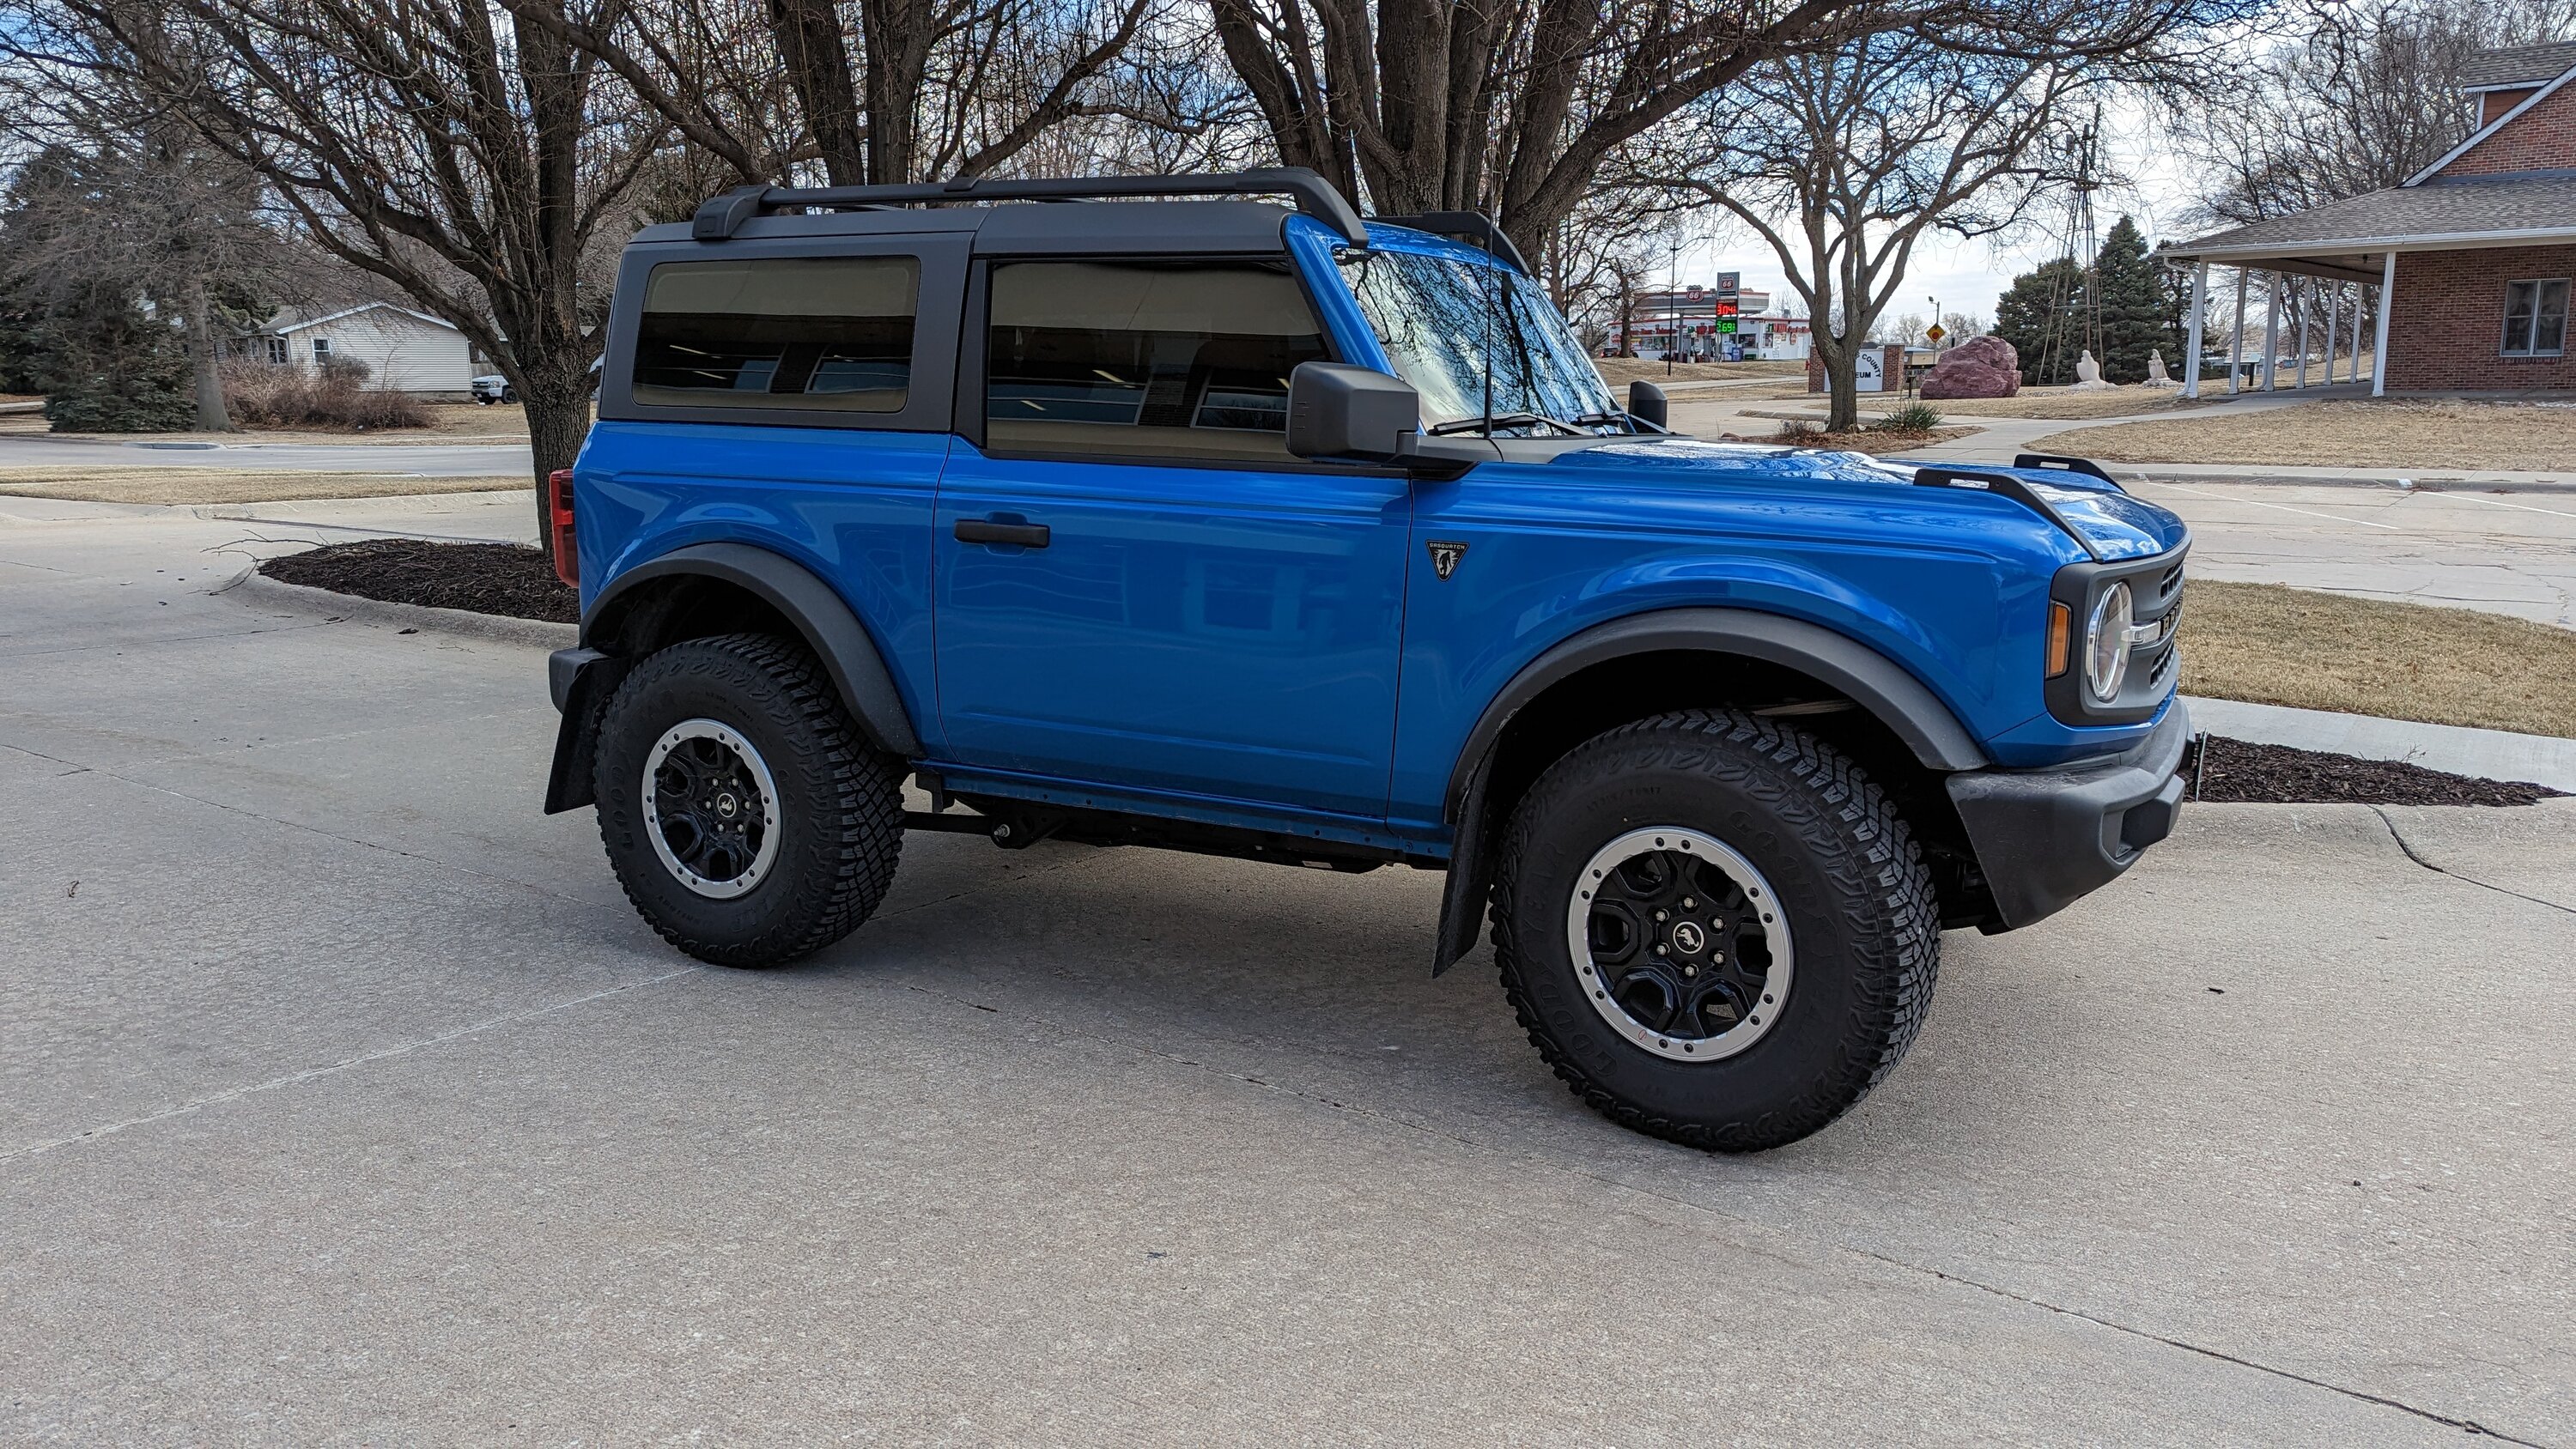 Ford Bronco Tint reference gallery -- post your Bronco pics & specs 📸 😎 PXL_20230318_200559862